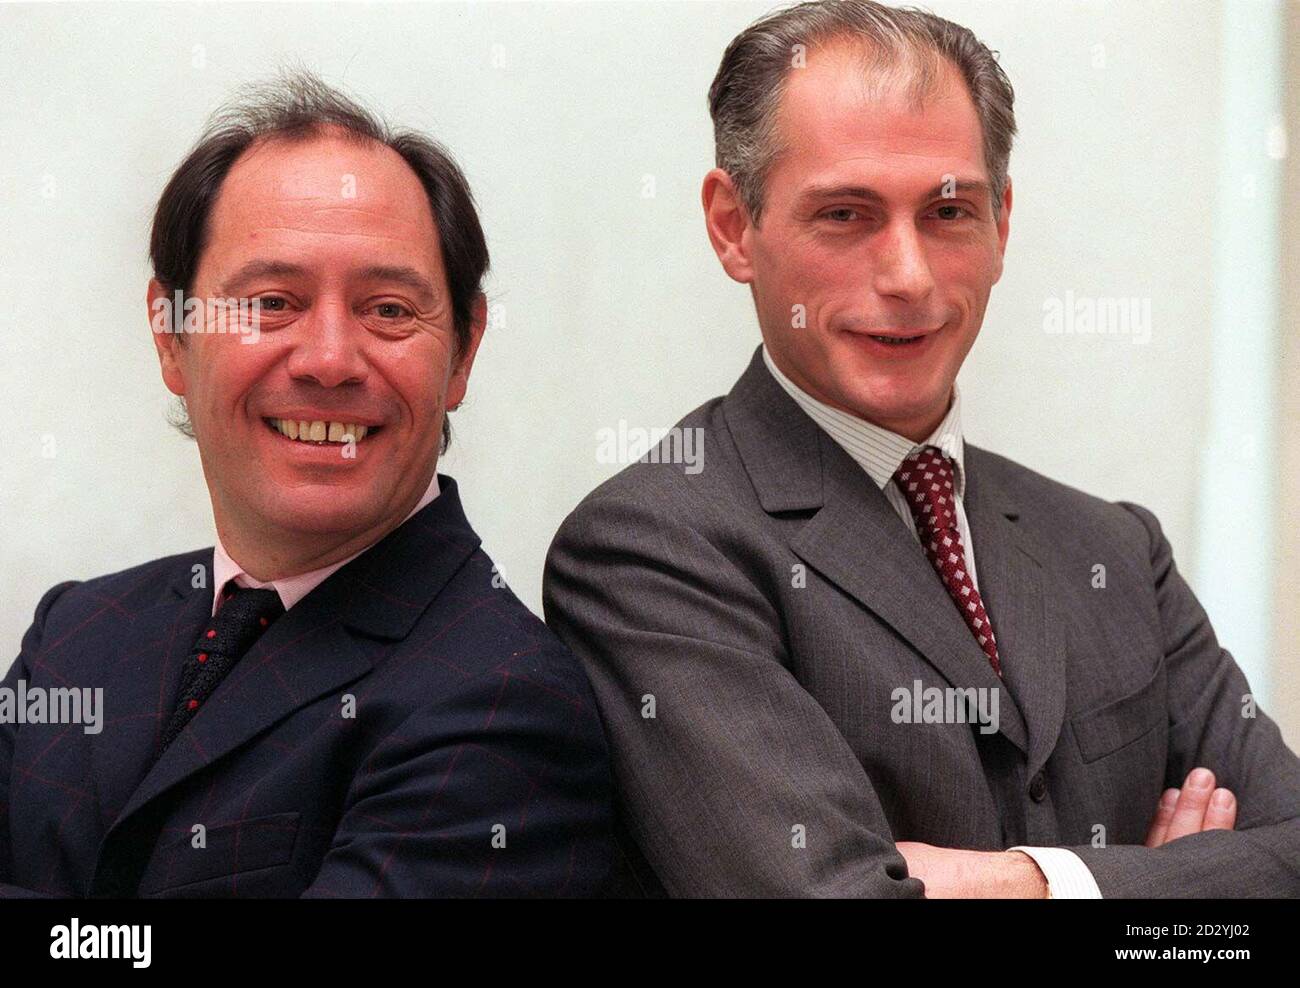 Claude Picasso (left) and Bernard Picasso the son and grandson of Pablo Picasso at the press launch for the forthcoming exhibition of Picasso ceramics at the Royal Academy of Arts today (Tuesday).  The exhibition Picasso: Painter and Sculptor in Clay runs from 17 September until 16 December 1998 at the Royal Academy of Arts.  Photo by Peter J Jordan/PA. Stock Photo